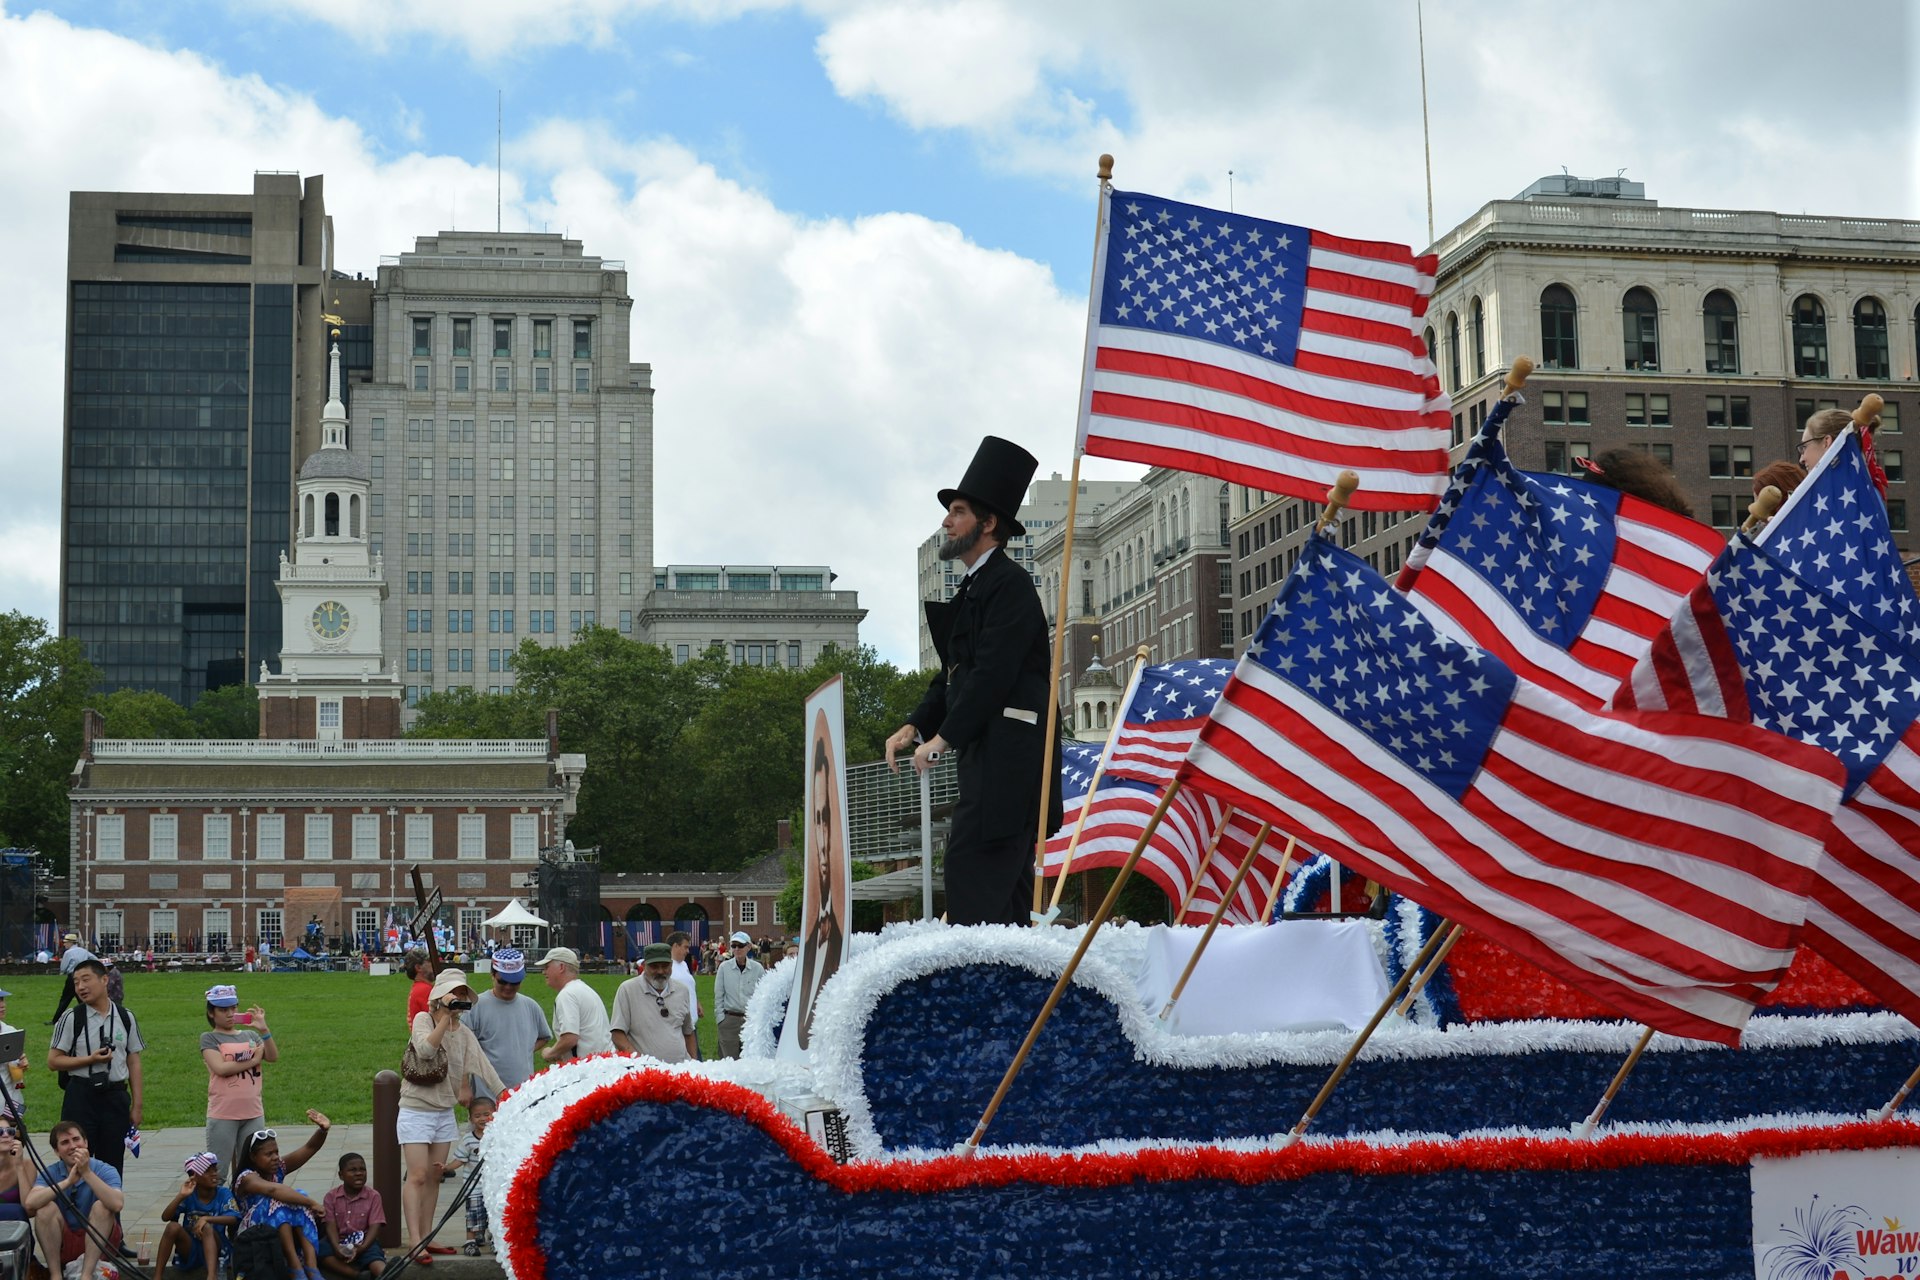 Abraham Lincoln rides a float in the Independence Day Parade as it makes its way along Market St in Philadelphia,